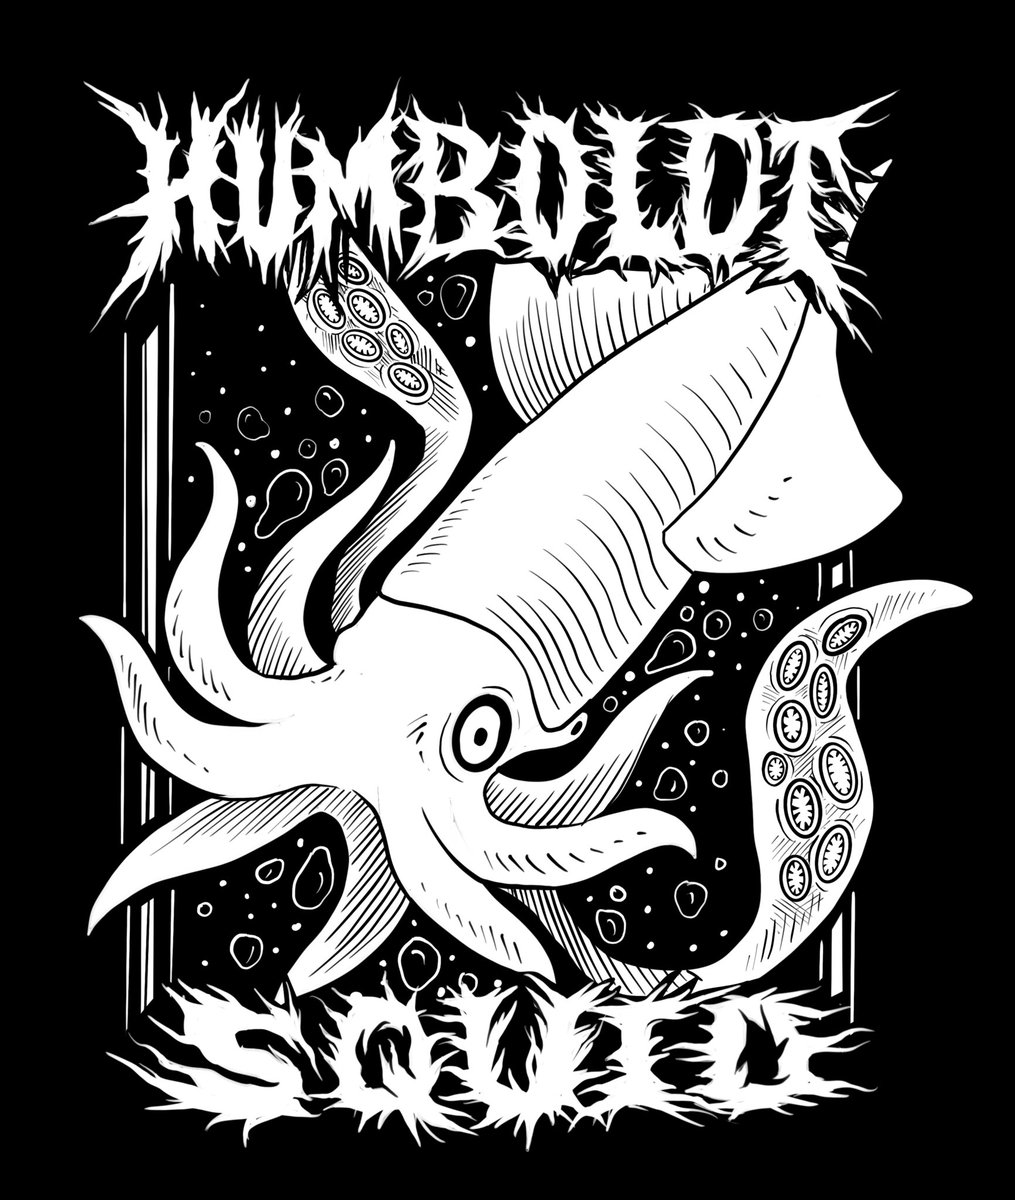 It’s #SQUIDtember AND #InverteFest so you all get some squid art 🥰🦑